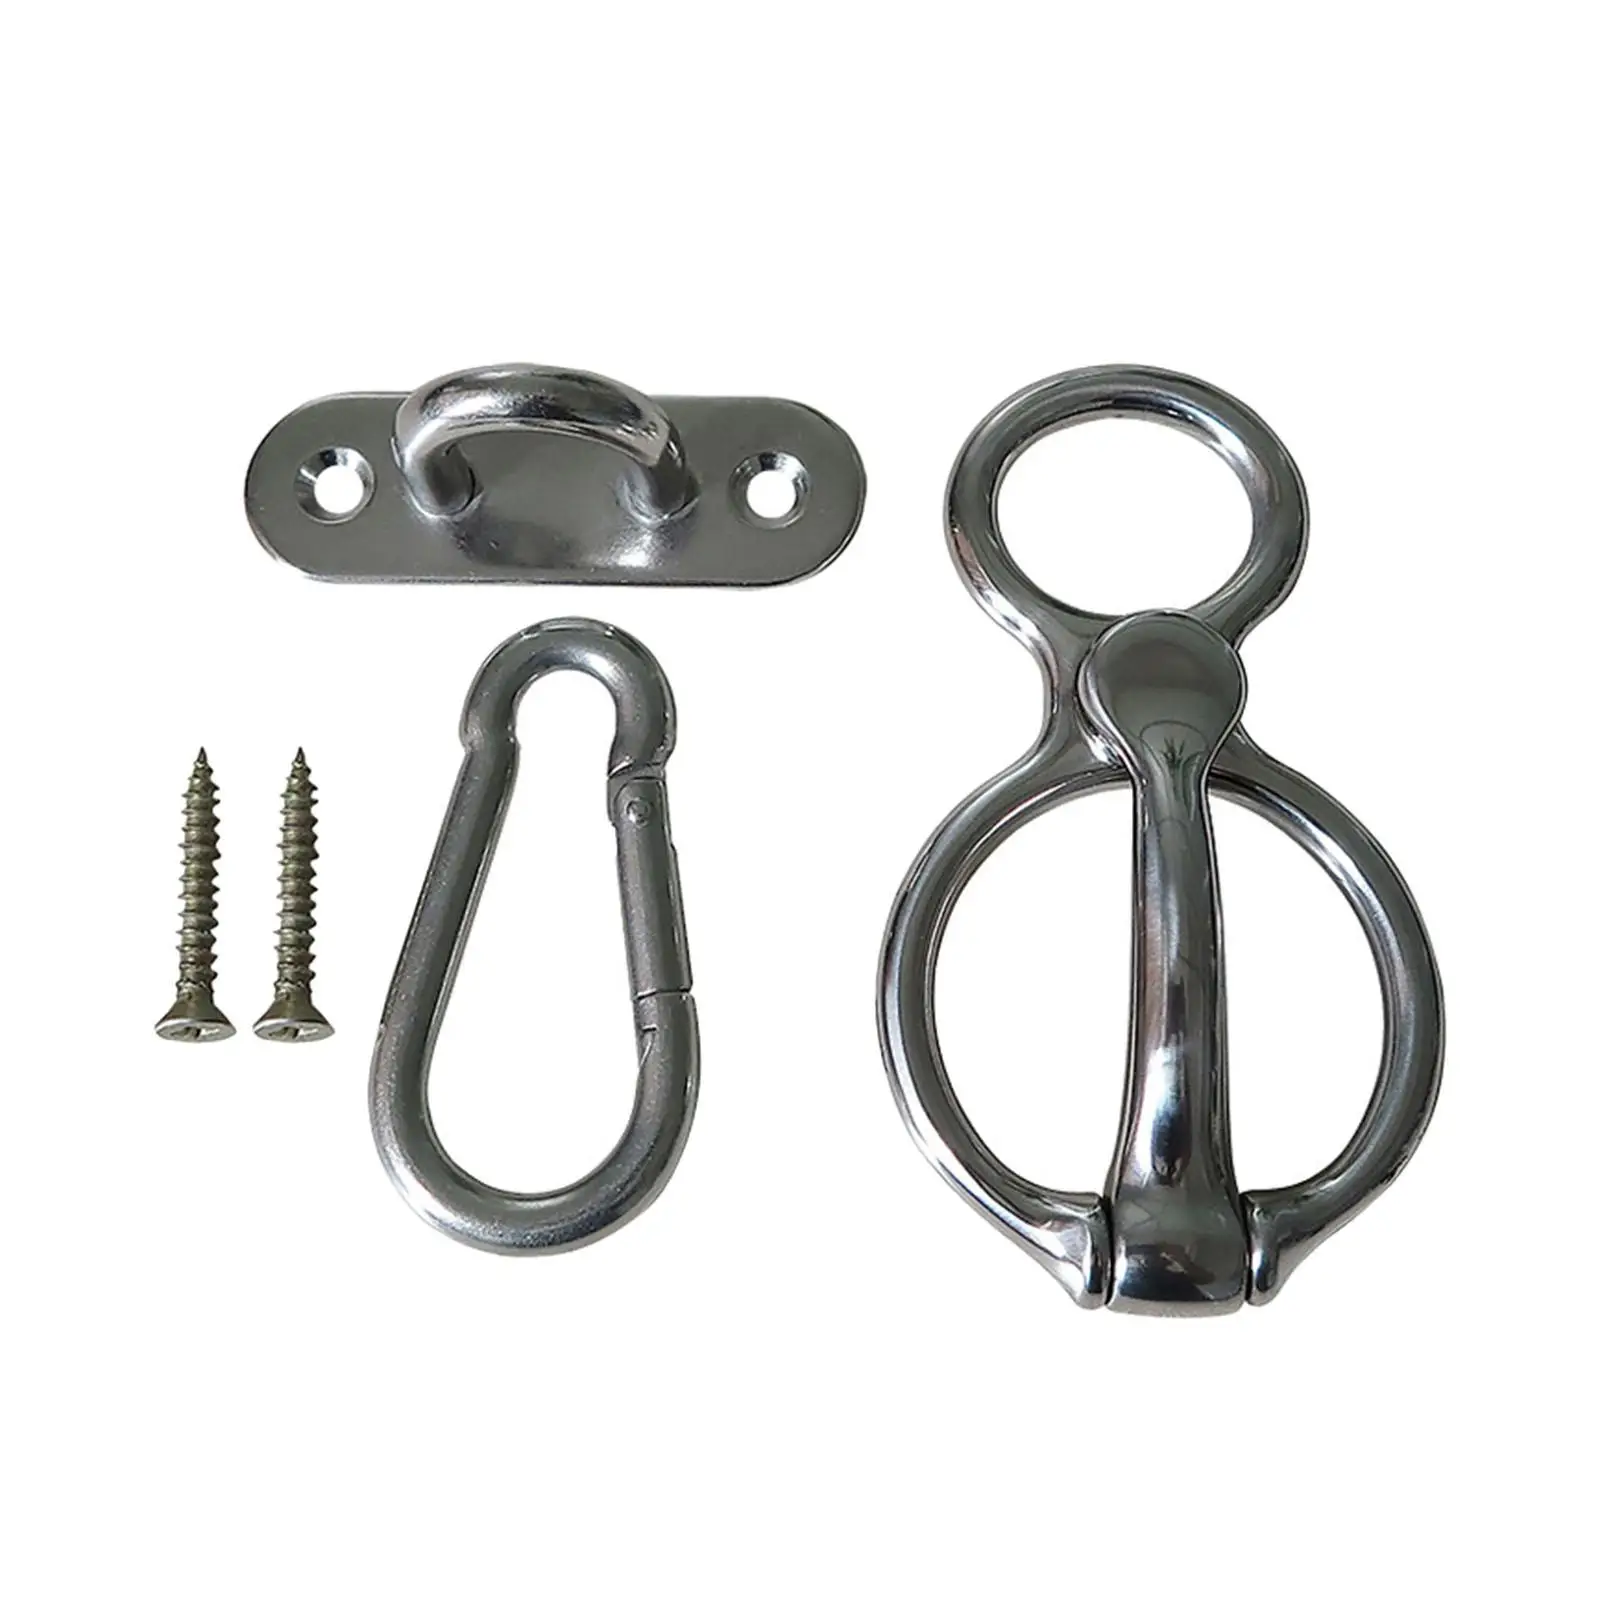 Horse Tie Ring Stainless Steel Fasteners with Eye Bolt Quick Snap Outdoor Sports Equestrian Livestock Tie Off Accessories